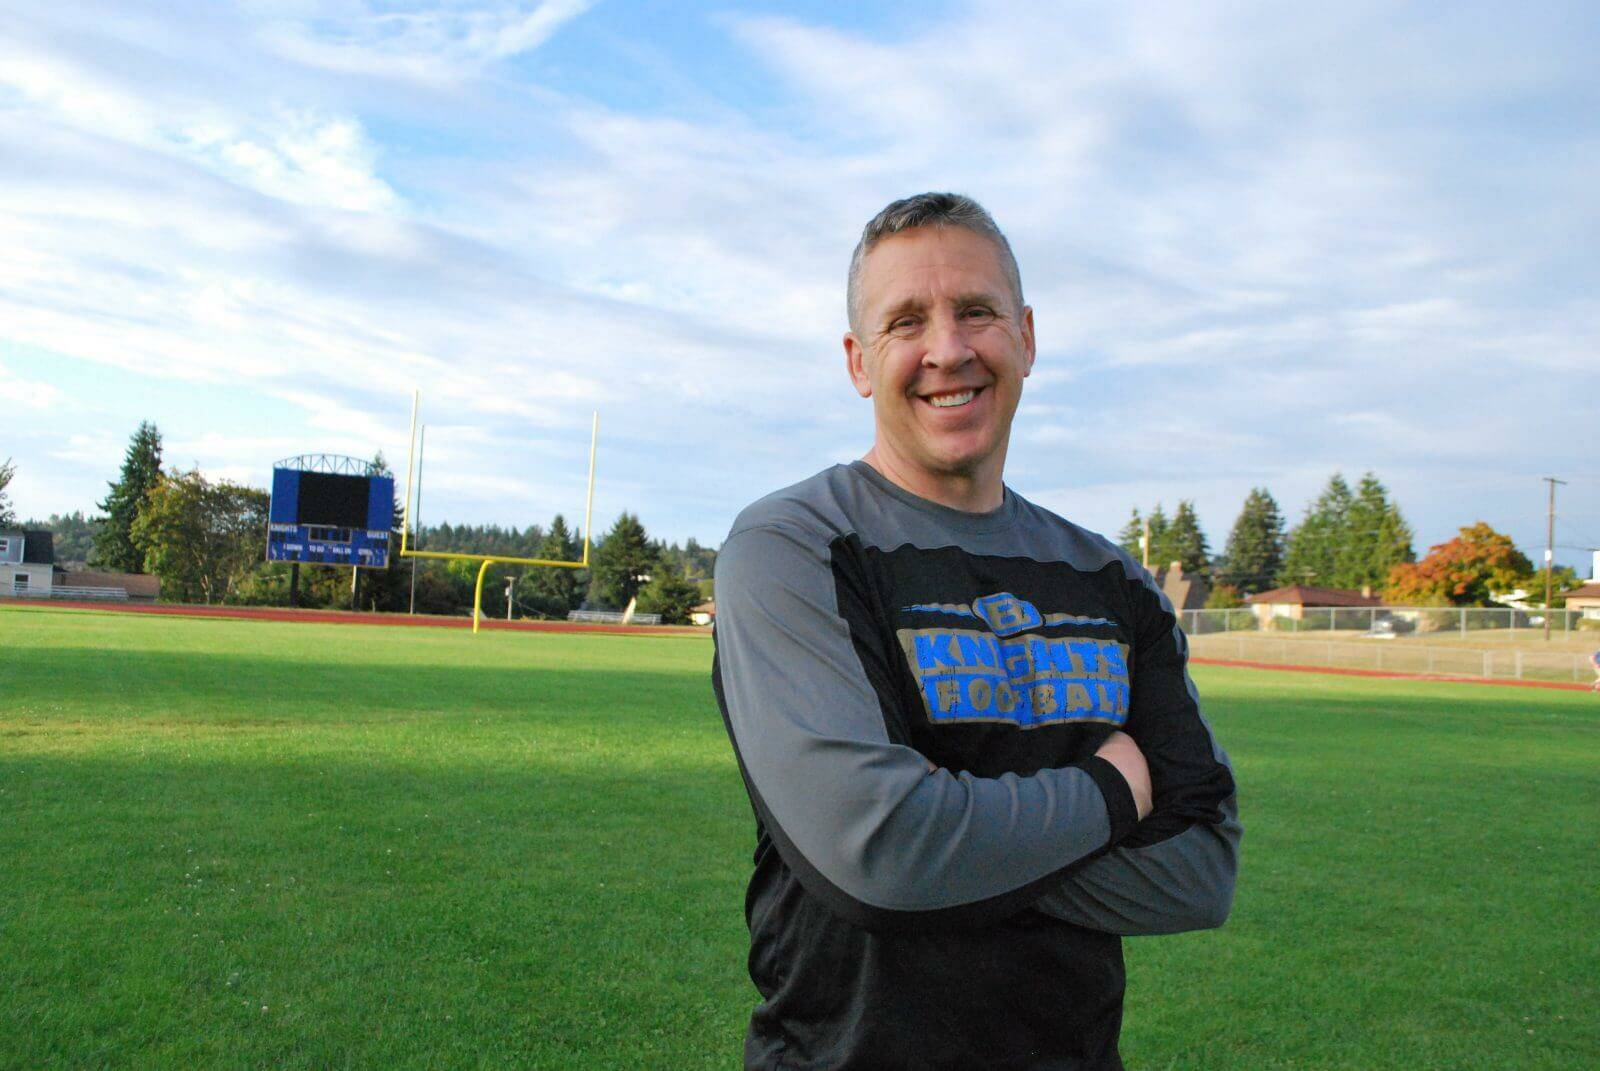 Former Bremerton High assistant football coach’s six-year battle leading up to the Supreme Court ends with a decision in his favor over religious freedom issues. (First Liberty Institute photo)